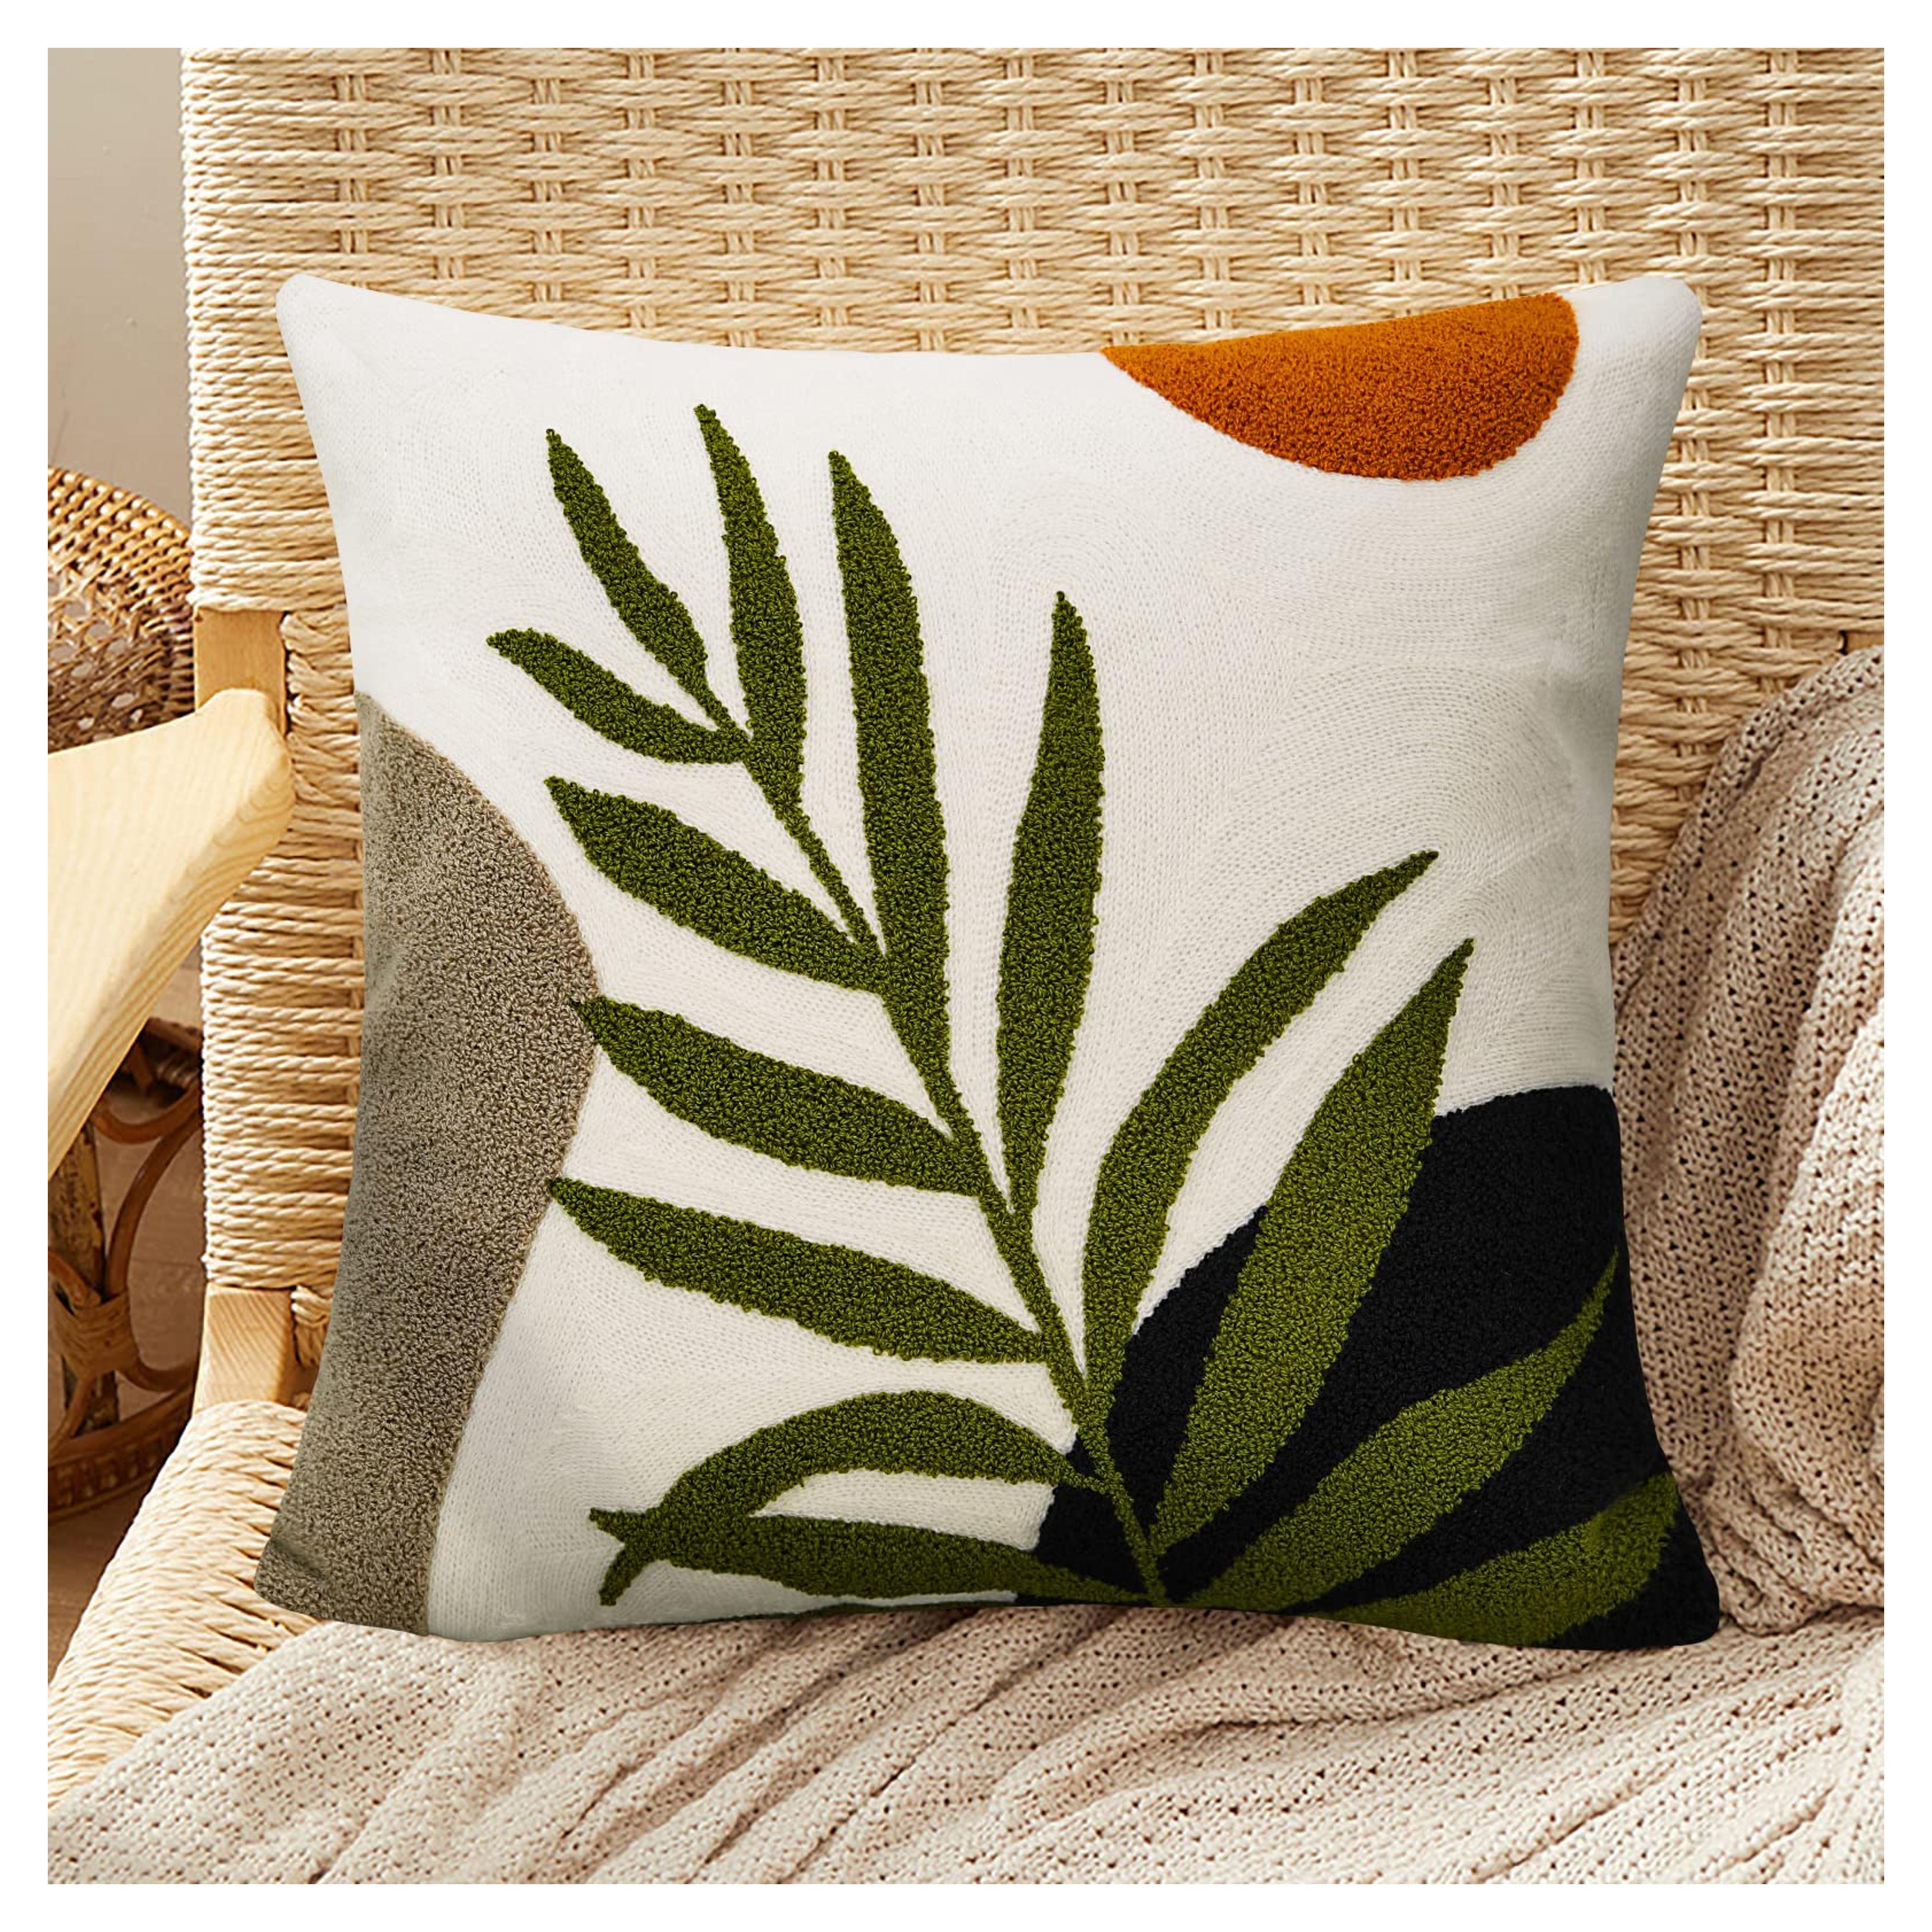 Merrycolor Boho Decorative Throw Pillow Covers 18x18 Tufted Green Decorative Pillows Covers Sun Leaf Mid Century Modern Throw Pillows for Bed Couch Sofa Living Room 1PC(Black and Green)